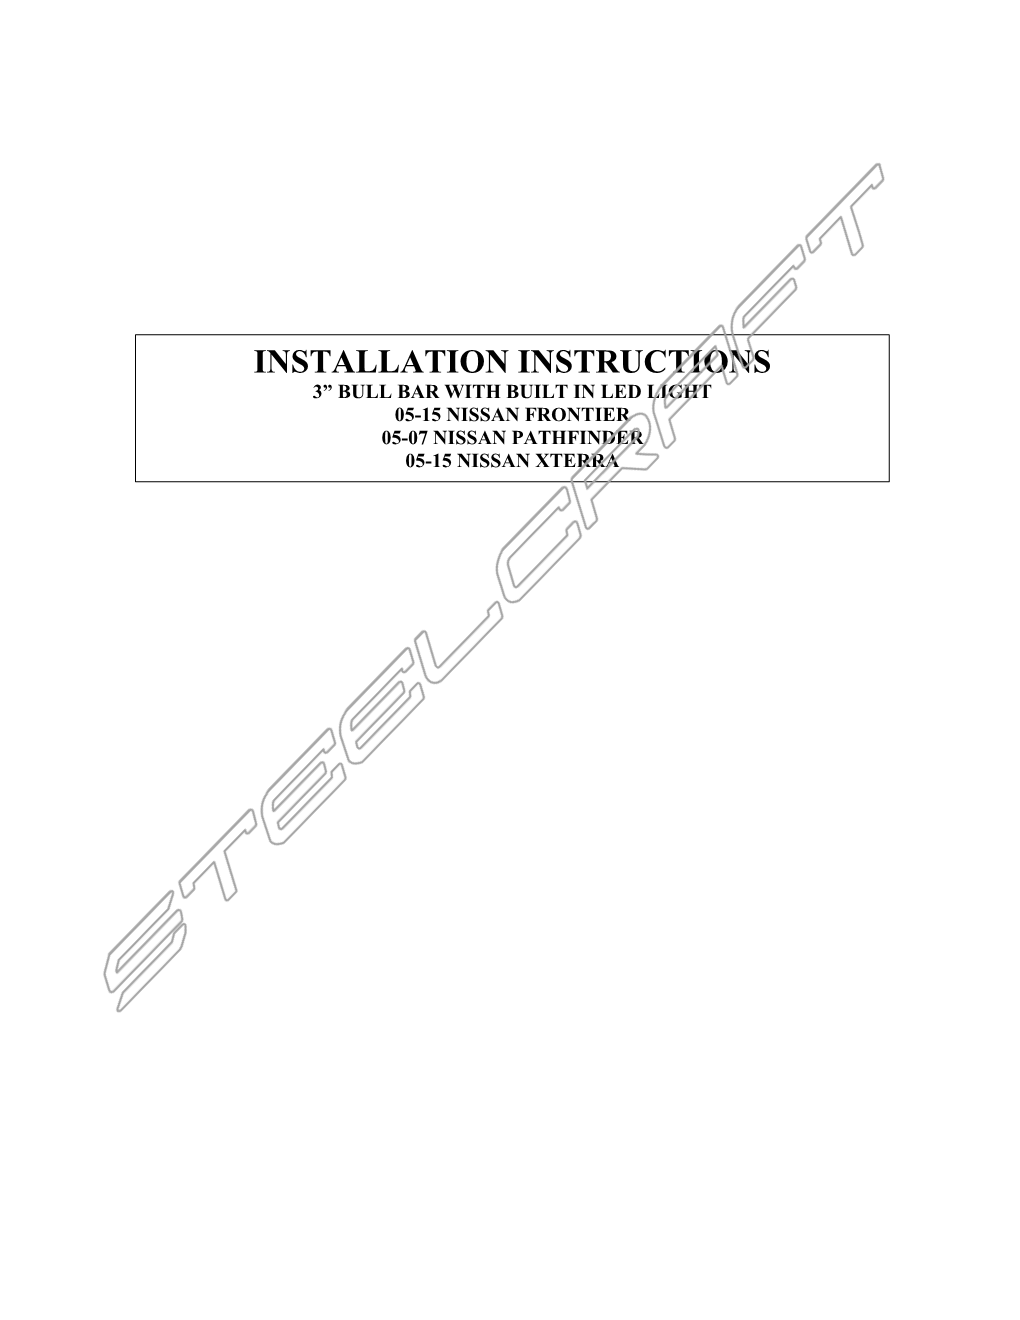 Installation Instructions 3” Bull Bar with Built in Led Light